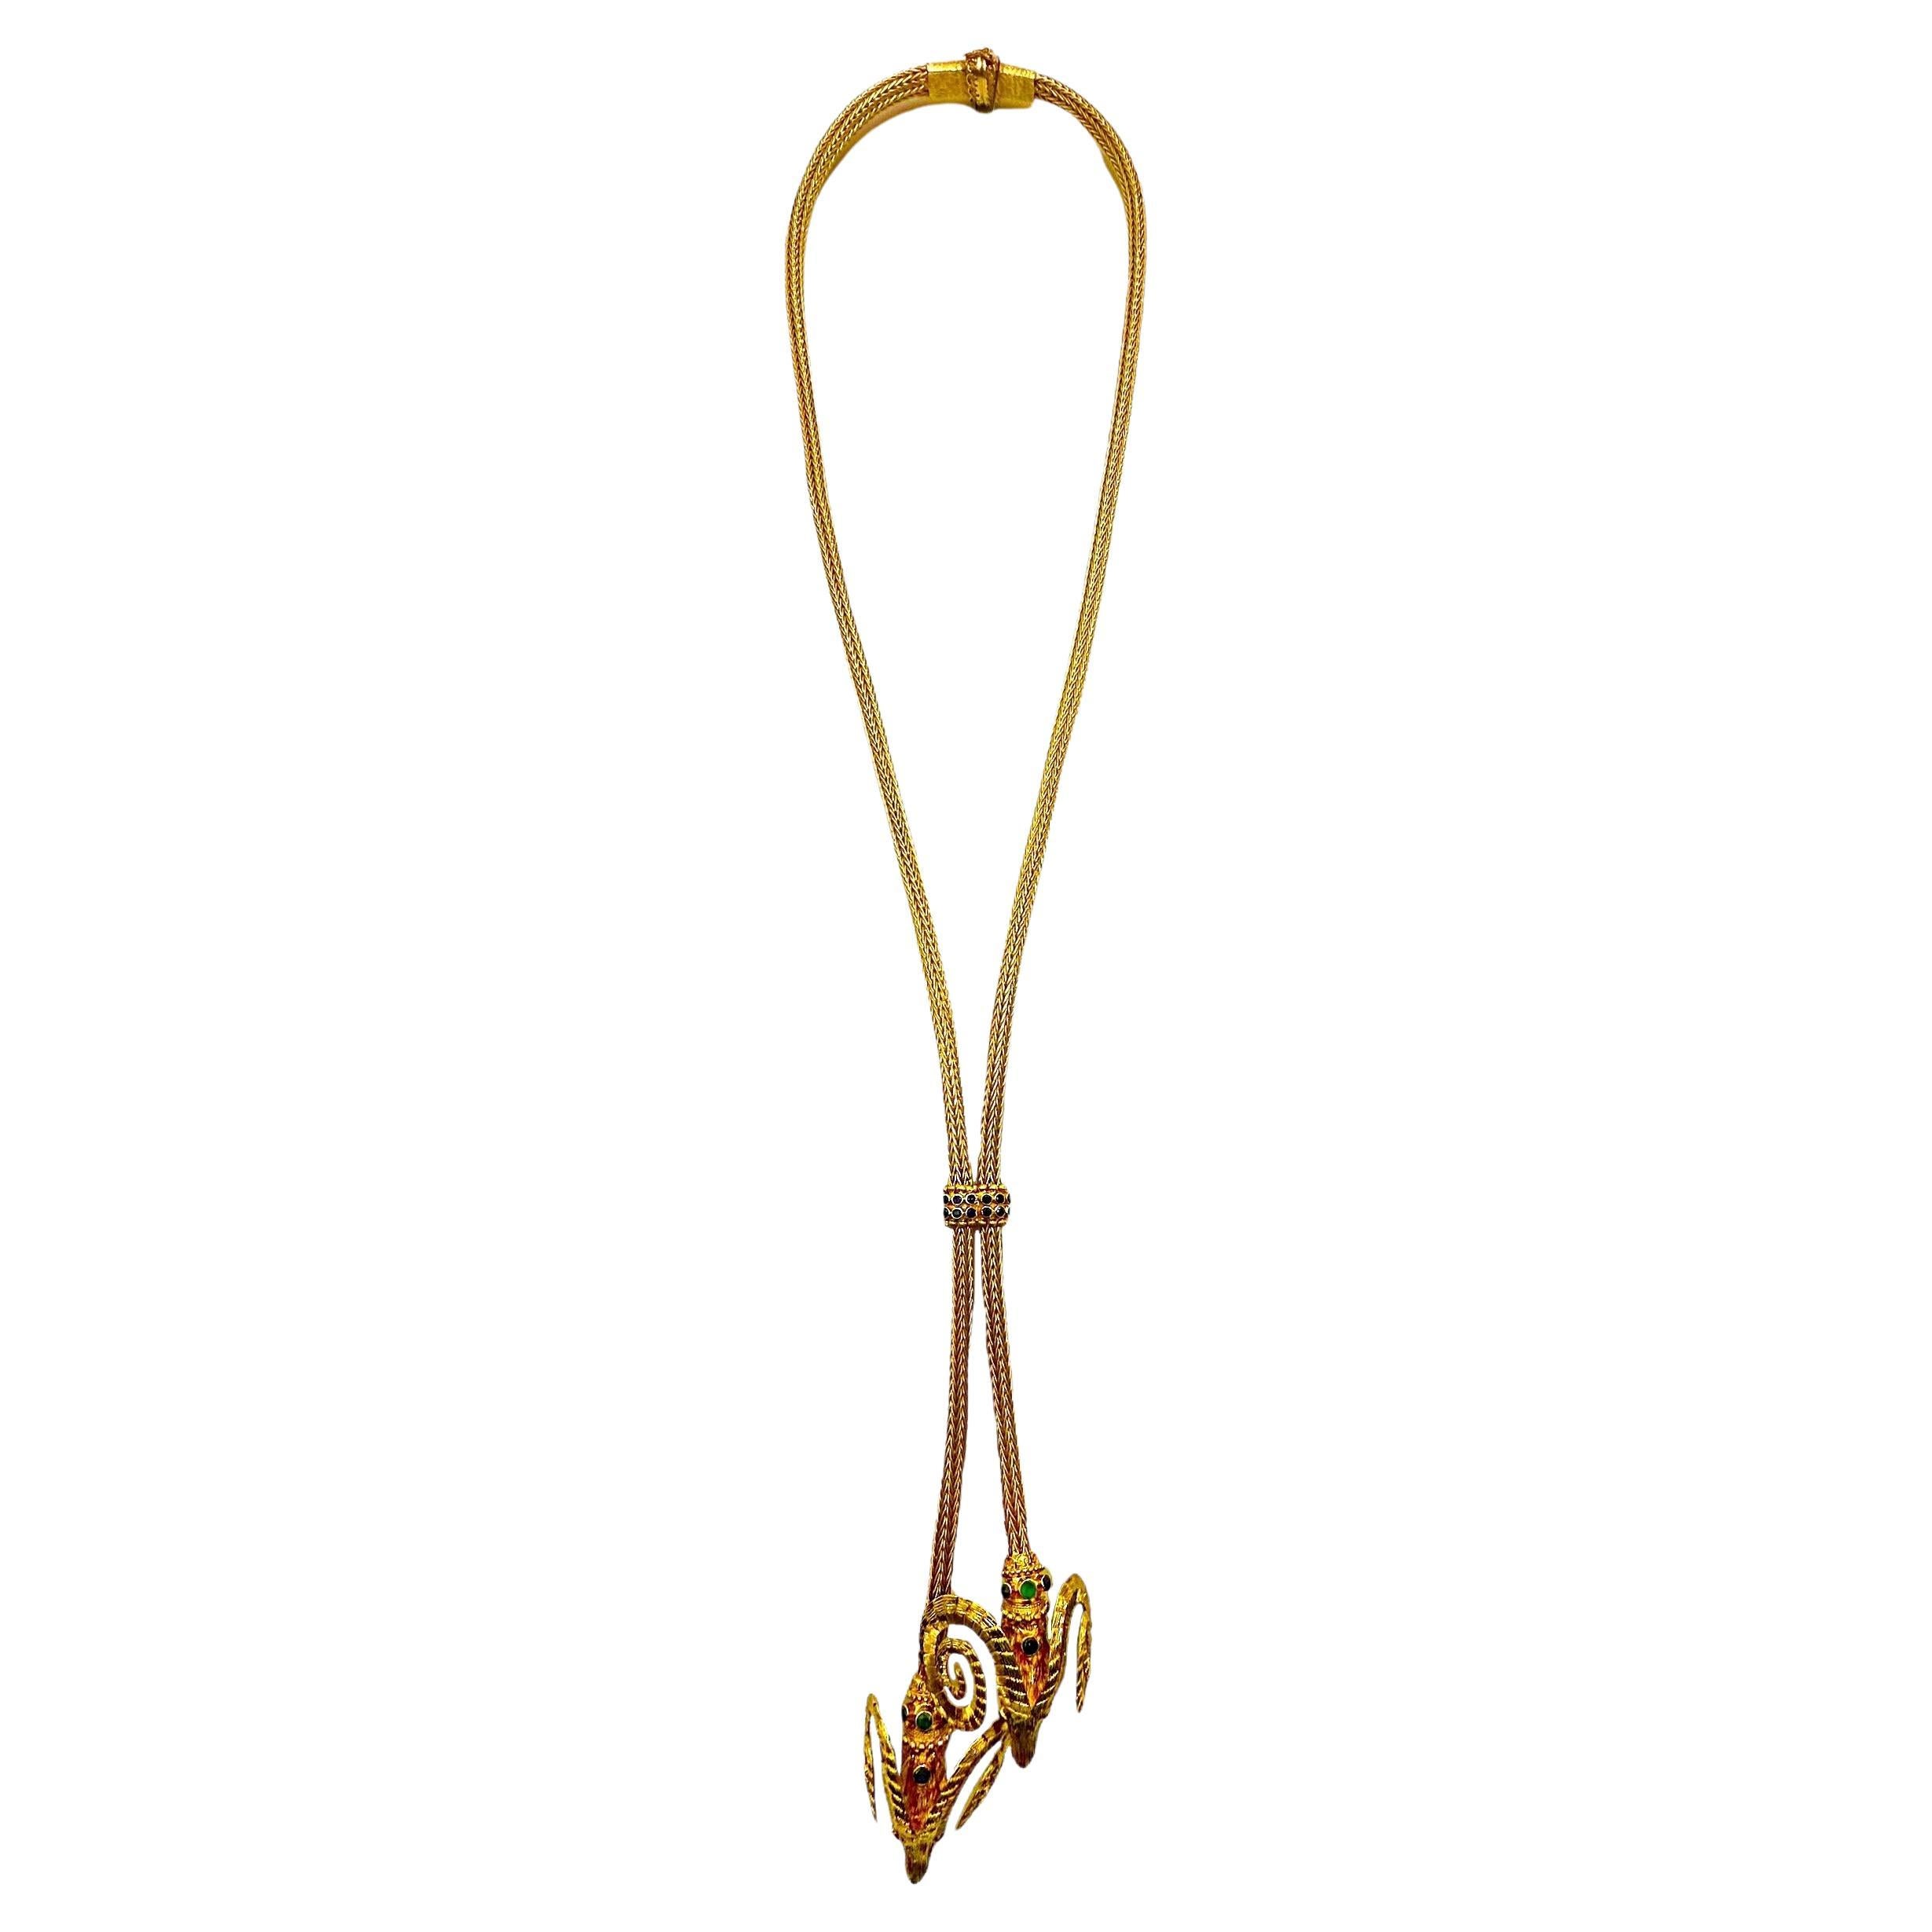 This 18k yellow gold Lalaounis double rams head lariat necklace is a truly magnificent example of  the esteemed Greek designers offerings. From clasp to tip, the necklace is comprised of 6mm diameter braided round gold strands, terminating at the